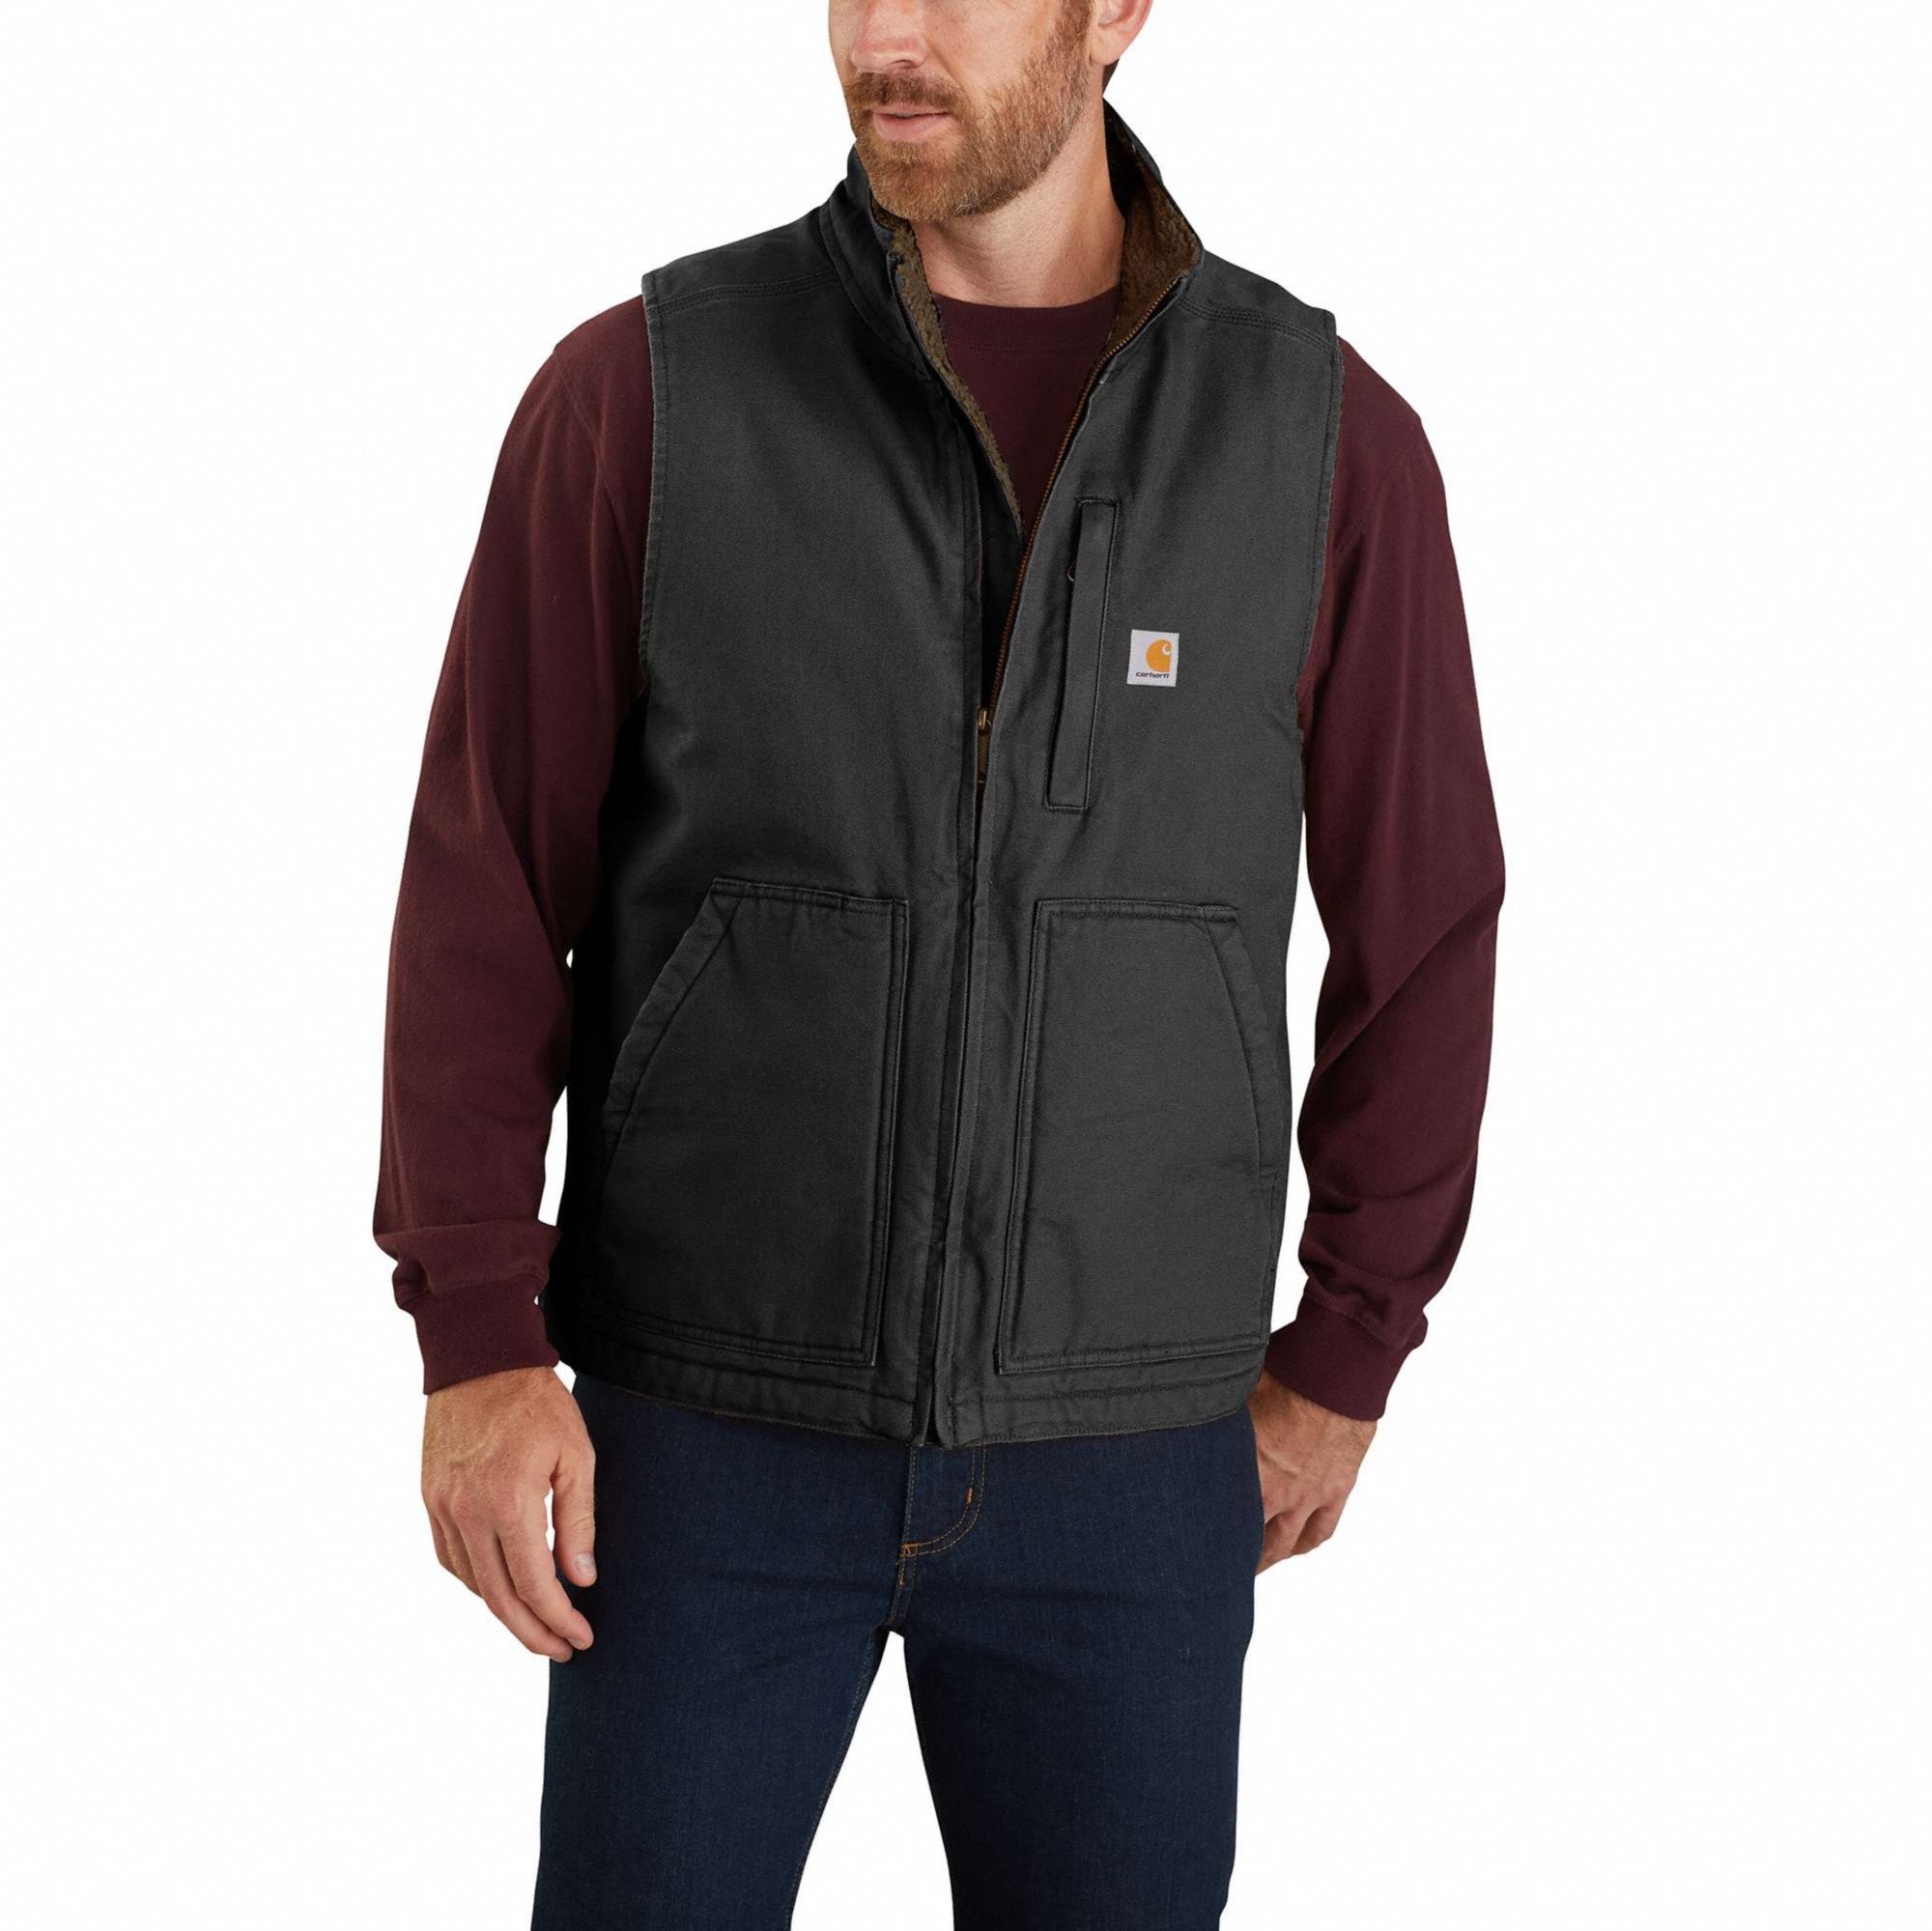 CARHARTT, L, 40 1/2 in Max Chest Size, Mock-Neck Vest - 804A89 